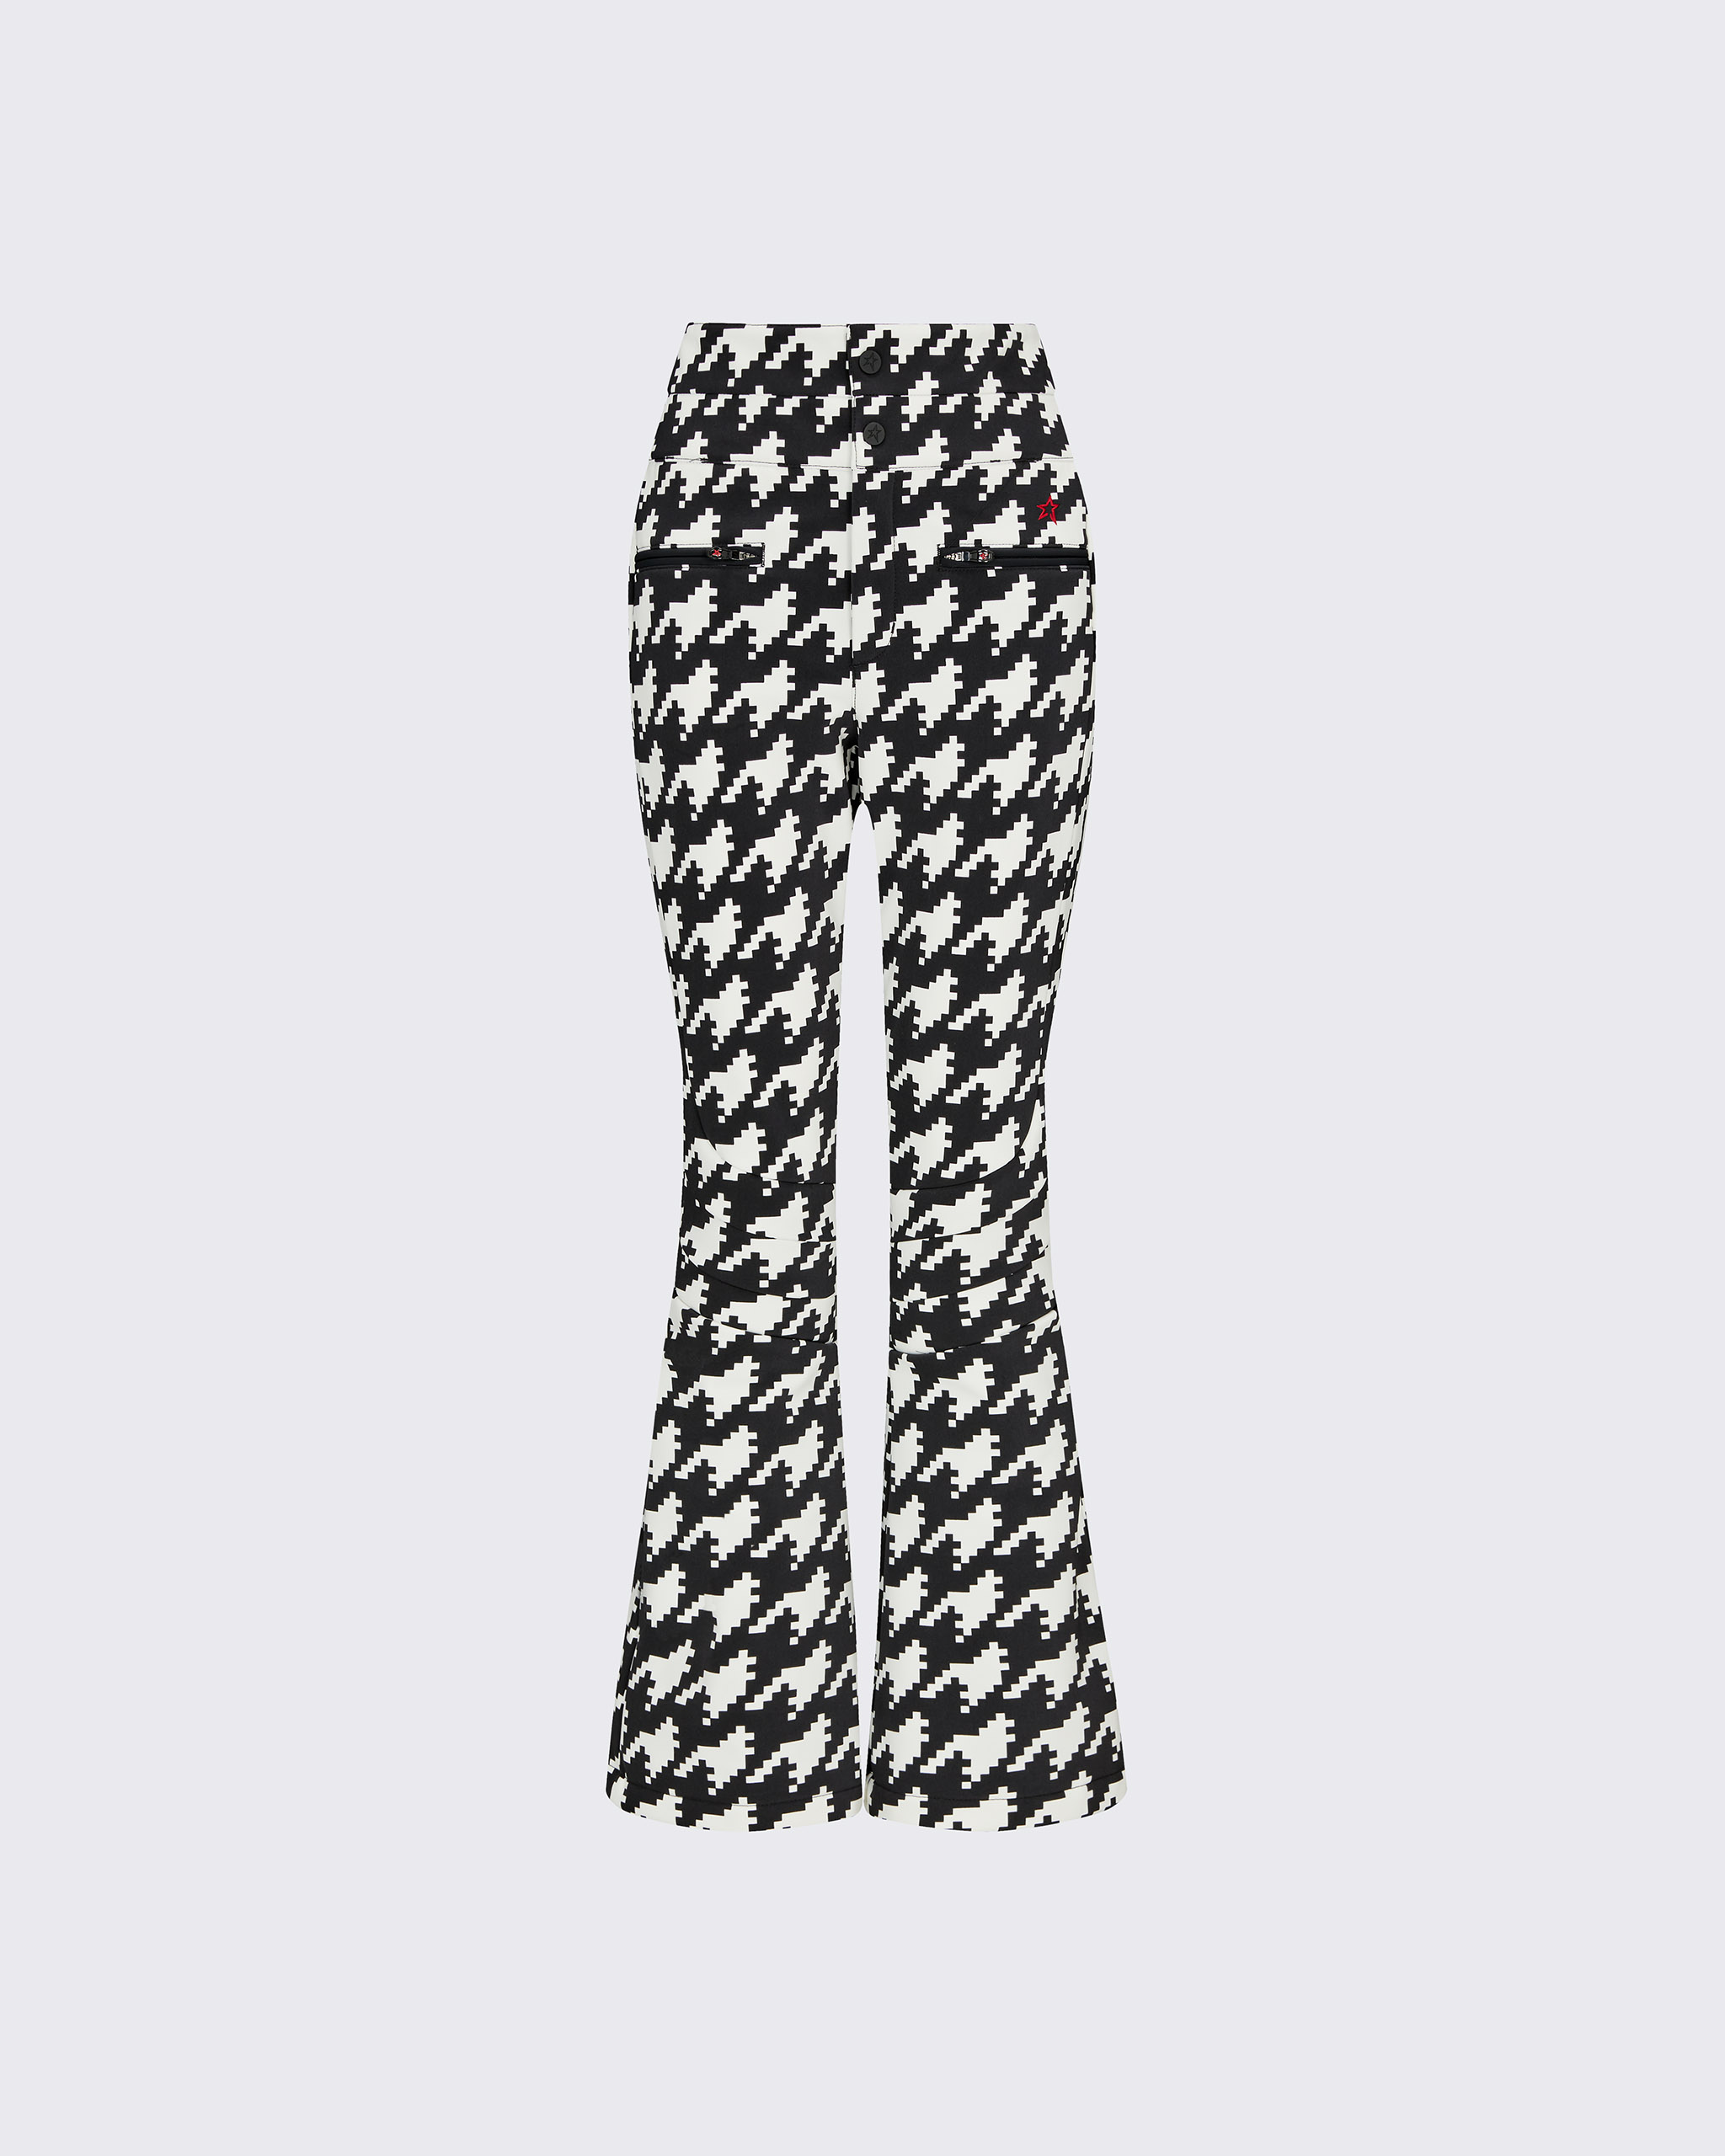 Perfect Moment Aurora High Waist Flare Pant in Black & Snow White  Houndstooth